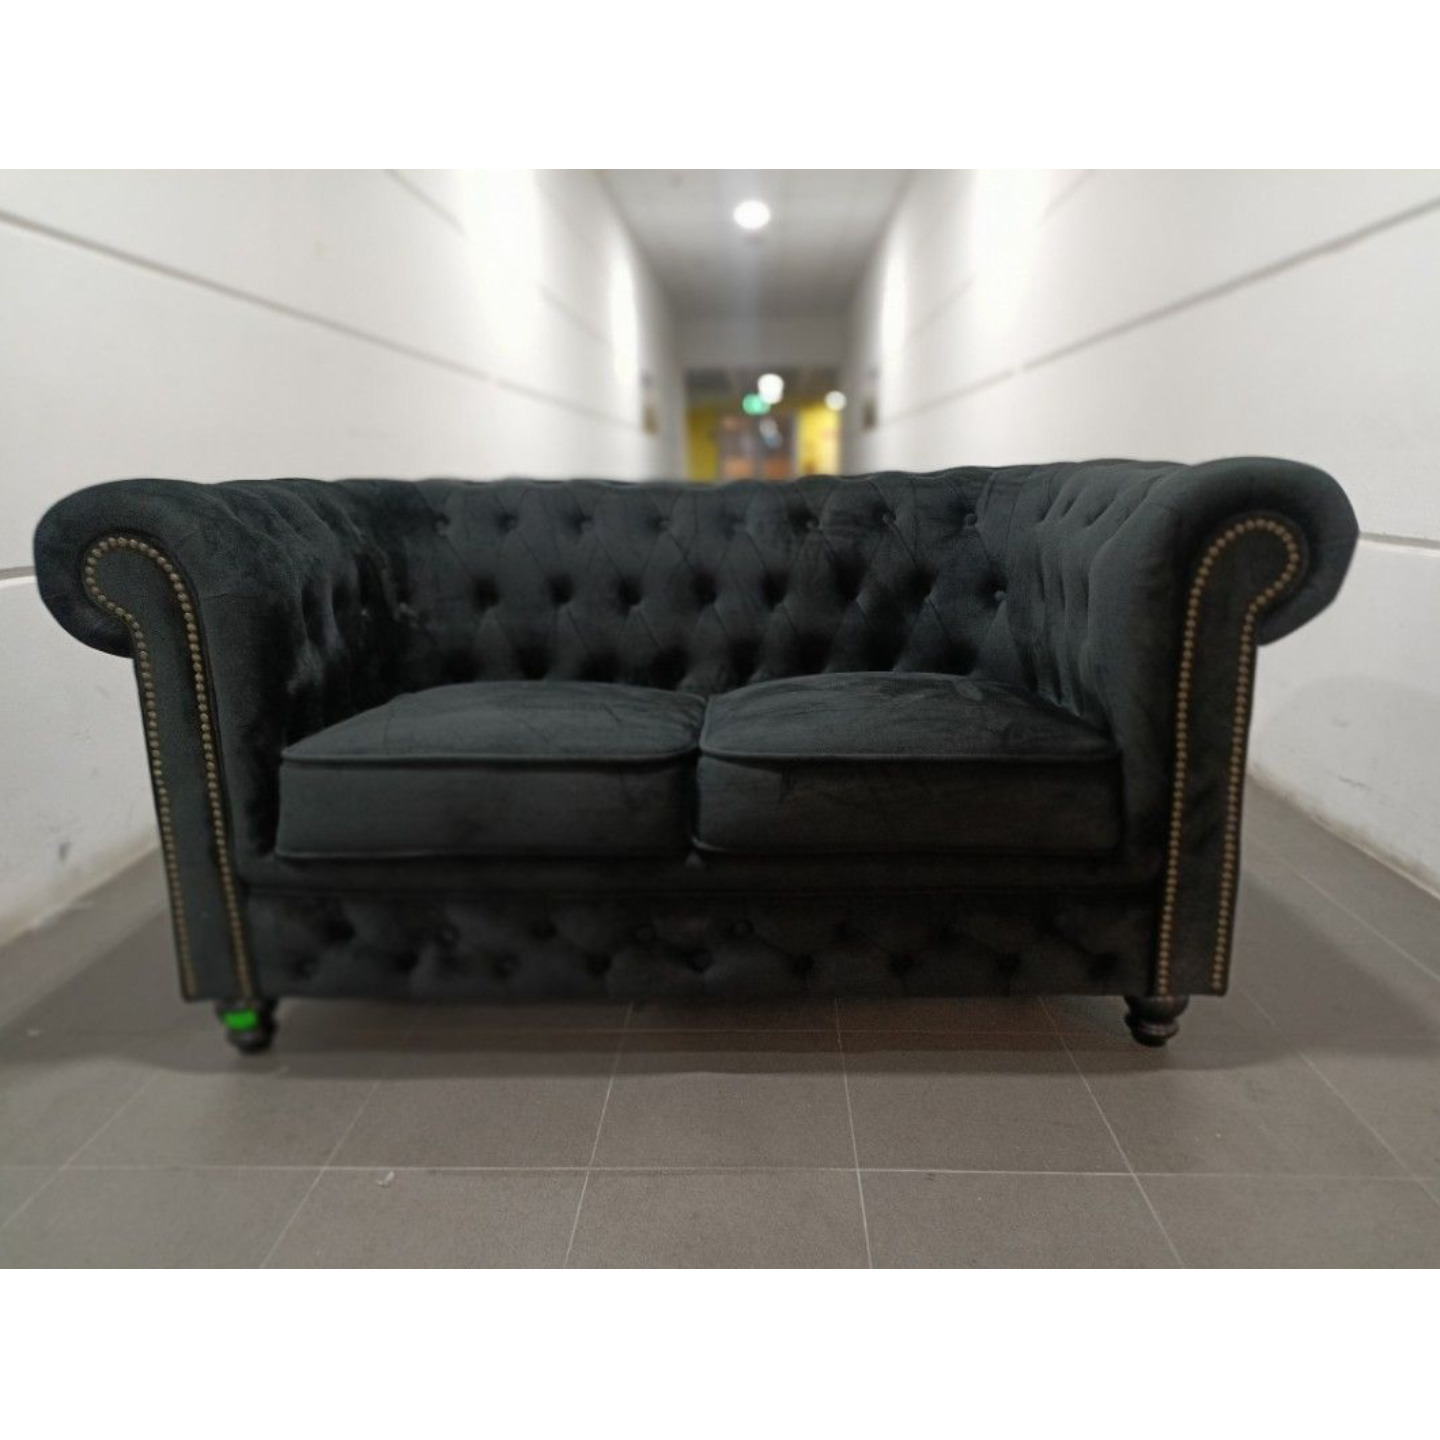 PRE ORDER SALVADORE X 2 Seater Chesterfield Sofa in VELVET BLACK - Estimated Delivery by July 2023.